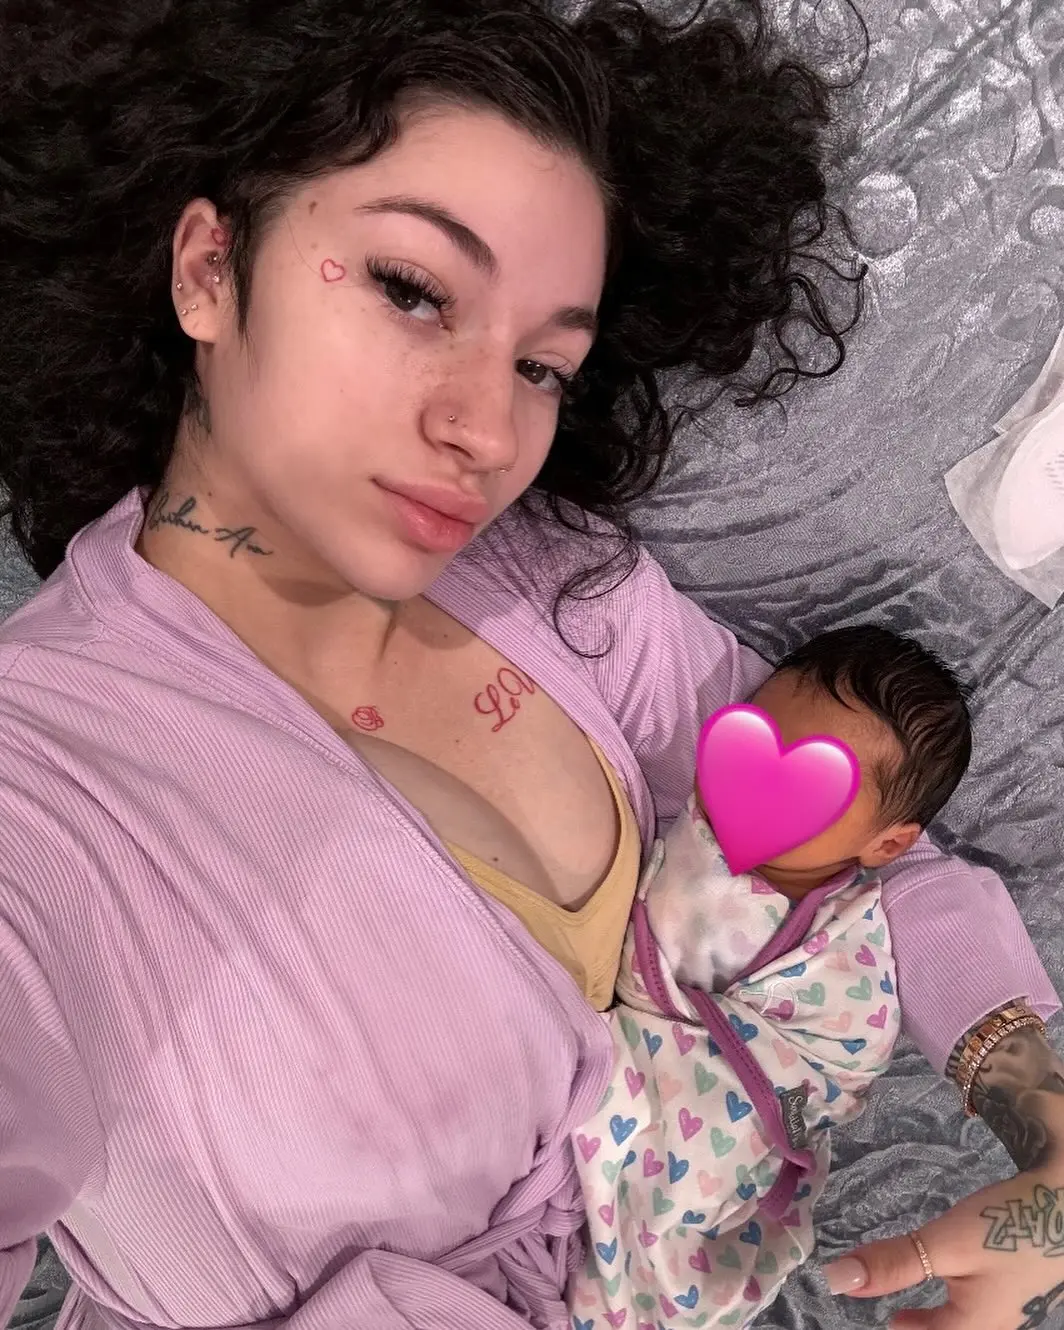 You Won't Believe How Cute Bhad Bhabie's Daughter Is! Celebrity Mom Shares First Look